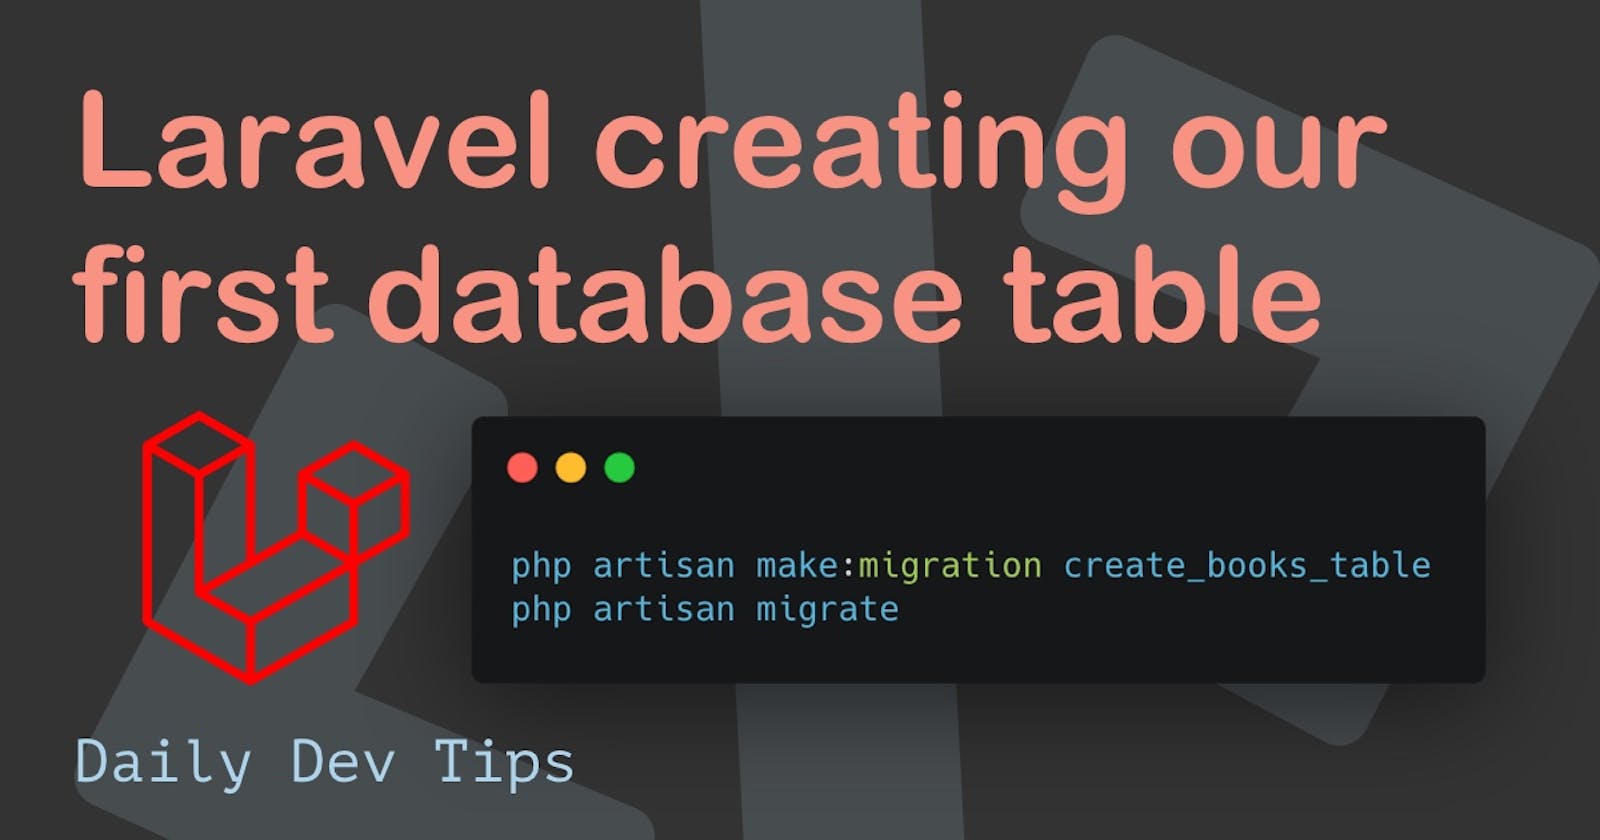 Laravel creating our first database table